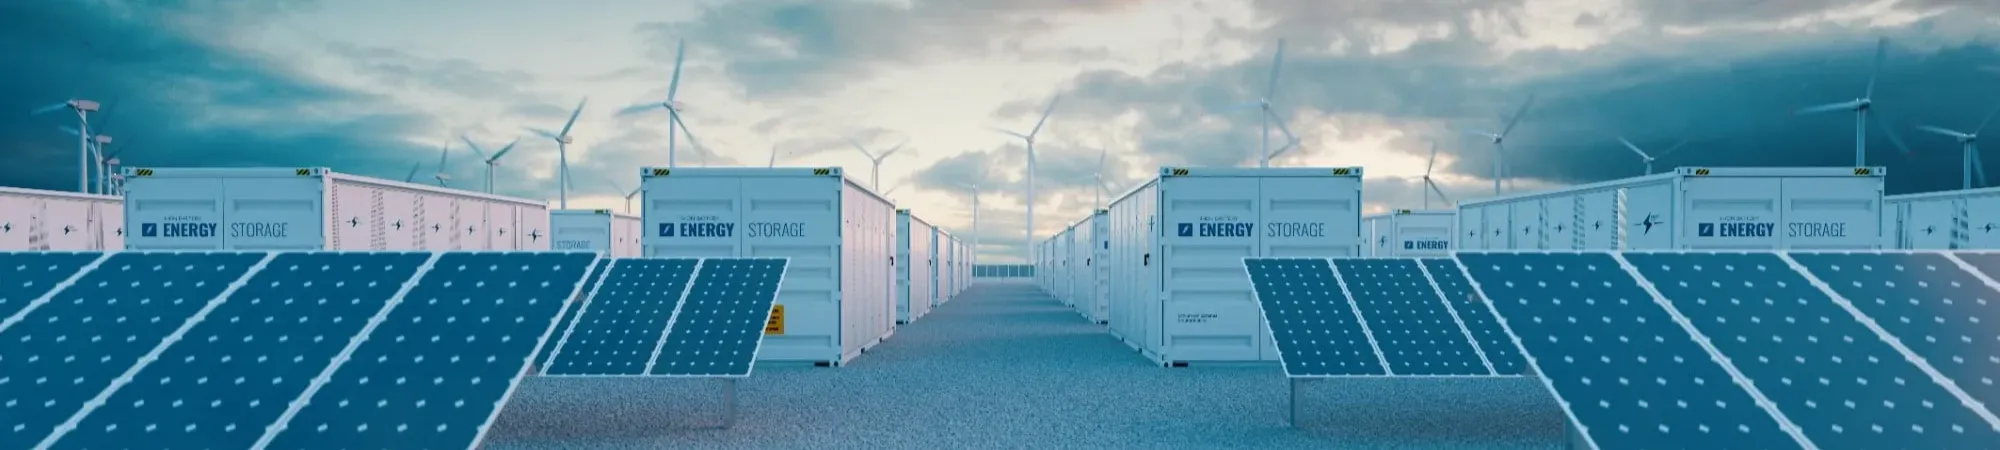 Solar panels and energy storage facilities producing renewable energy at a UK site